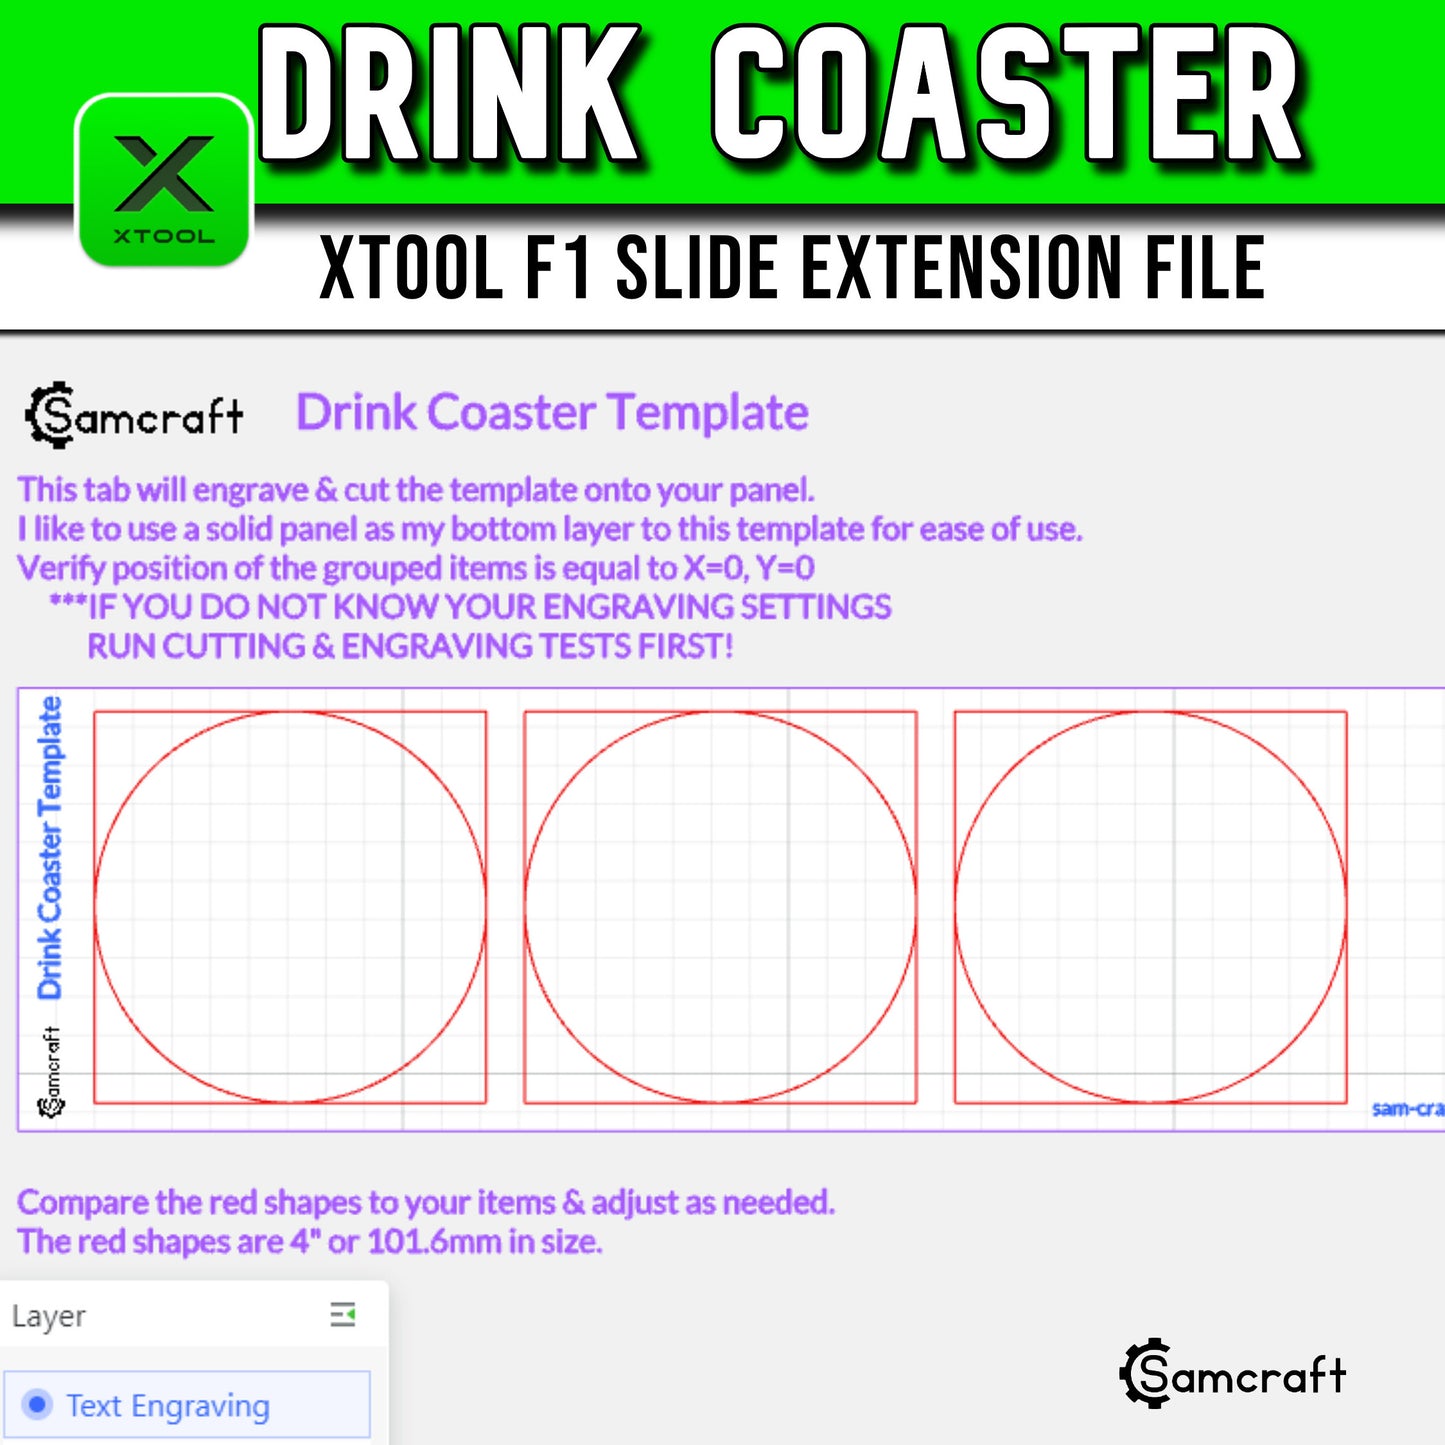 Drink Coaster Template - xTool F1 Slide Extension